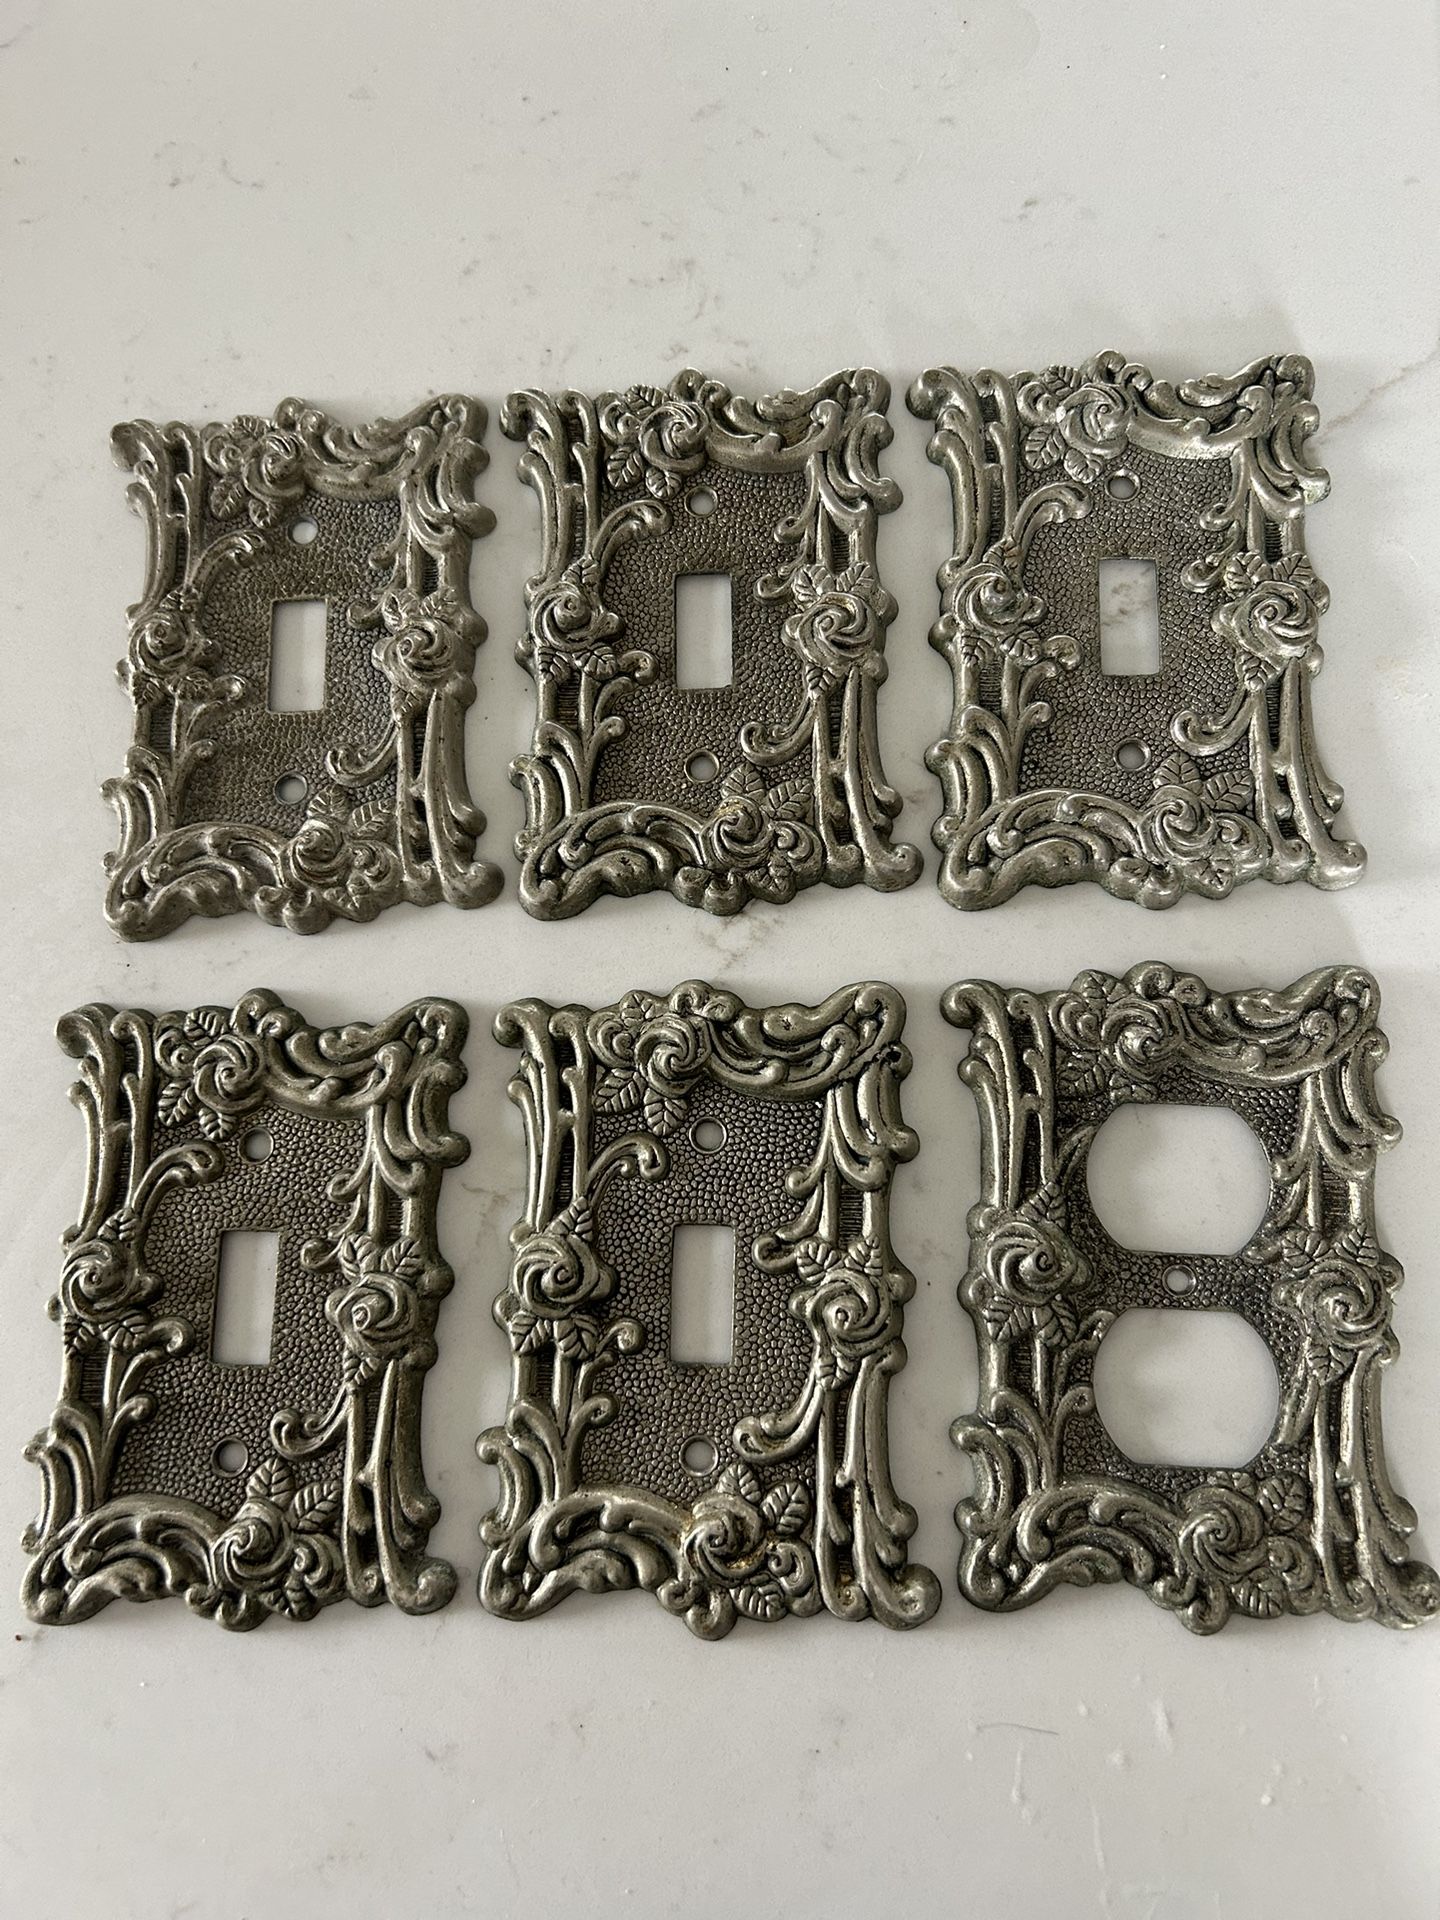 Vintage Ornate Light Switch And Outlet Covers